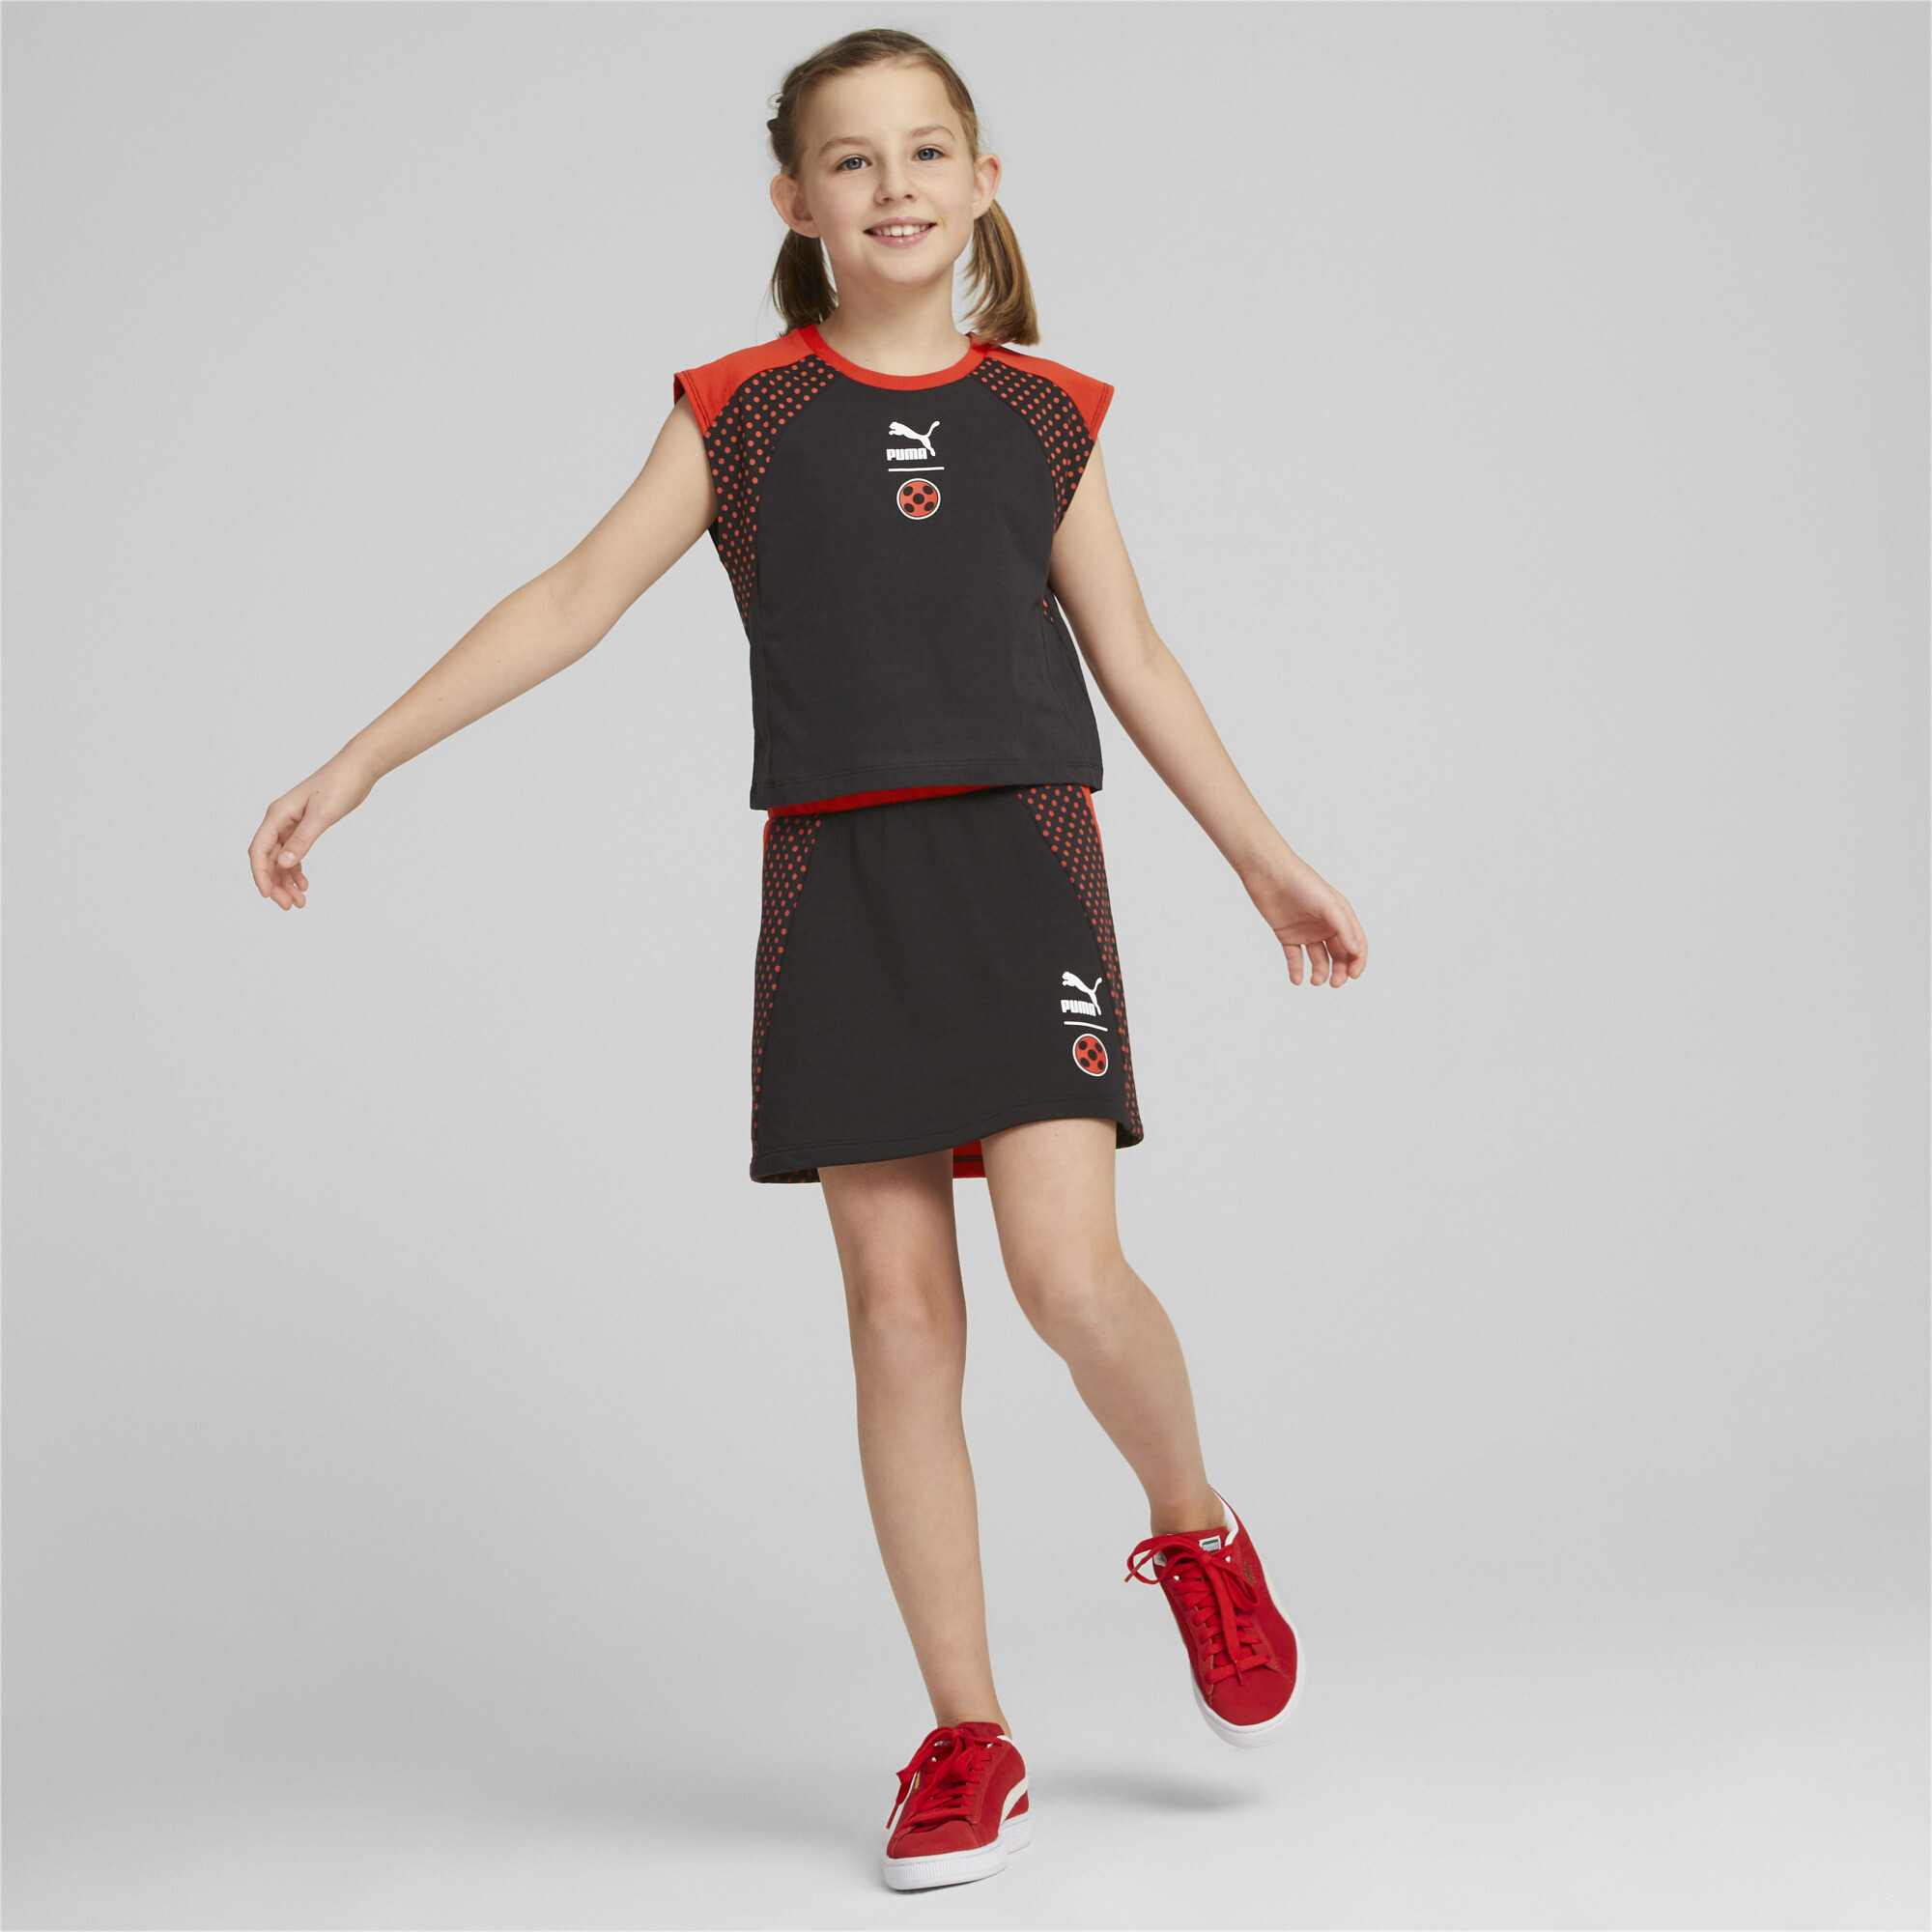 PUMA X MIRACULOUS Skirt In Black, Size 9-10 Youth